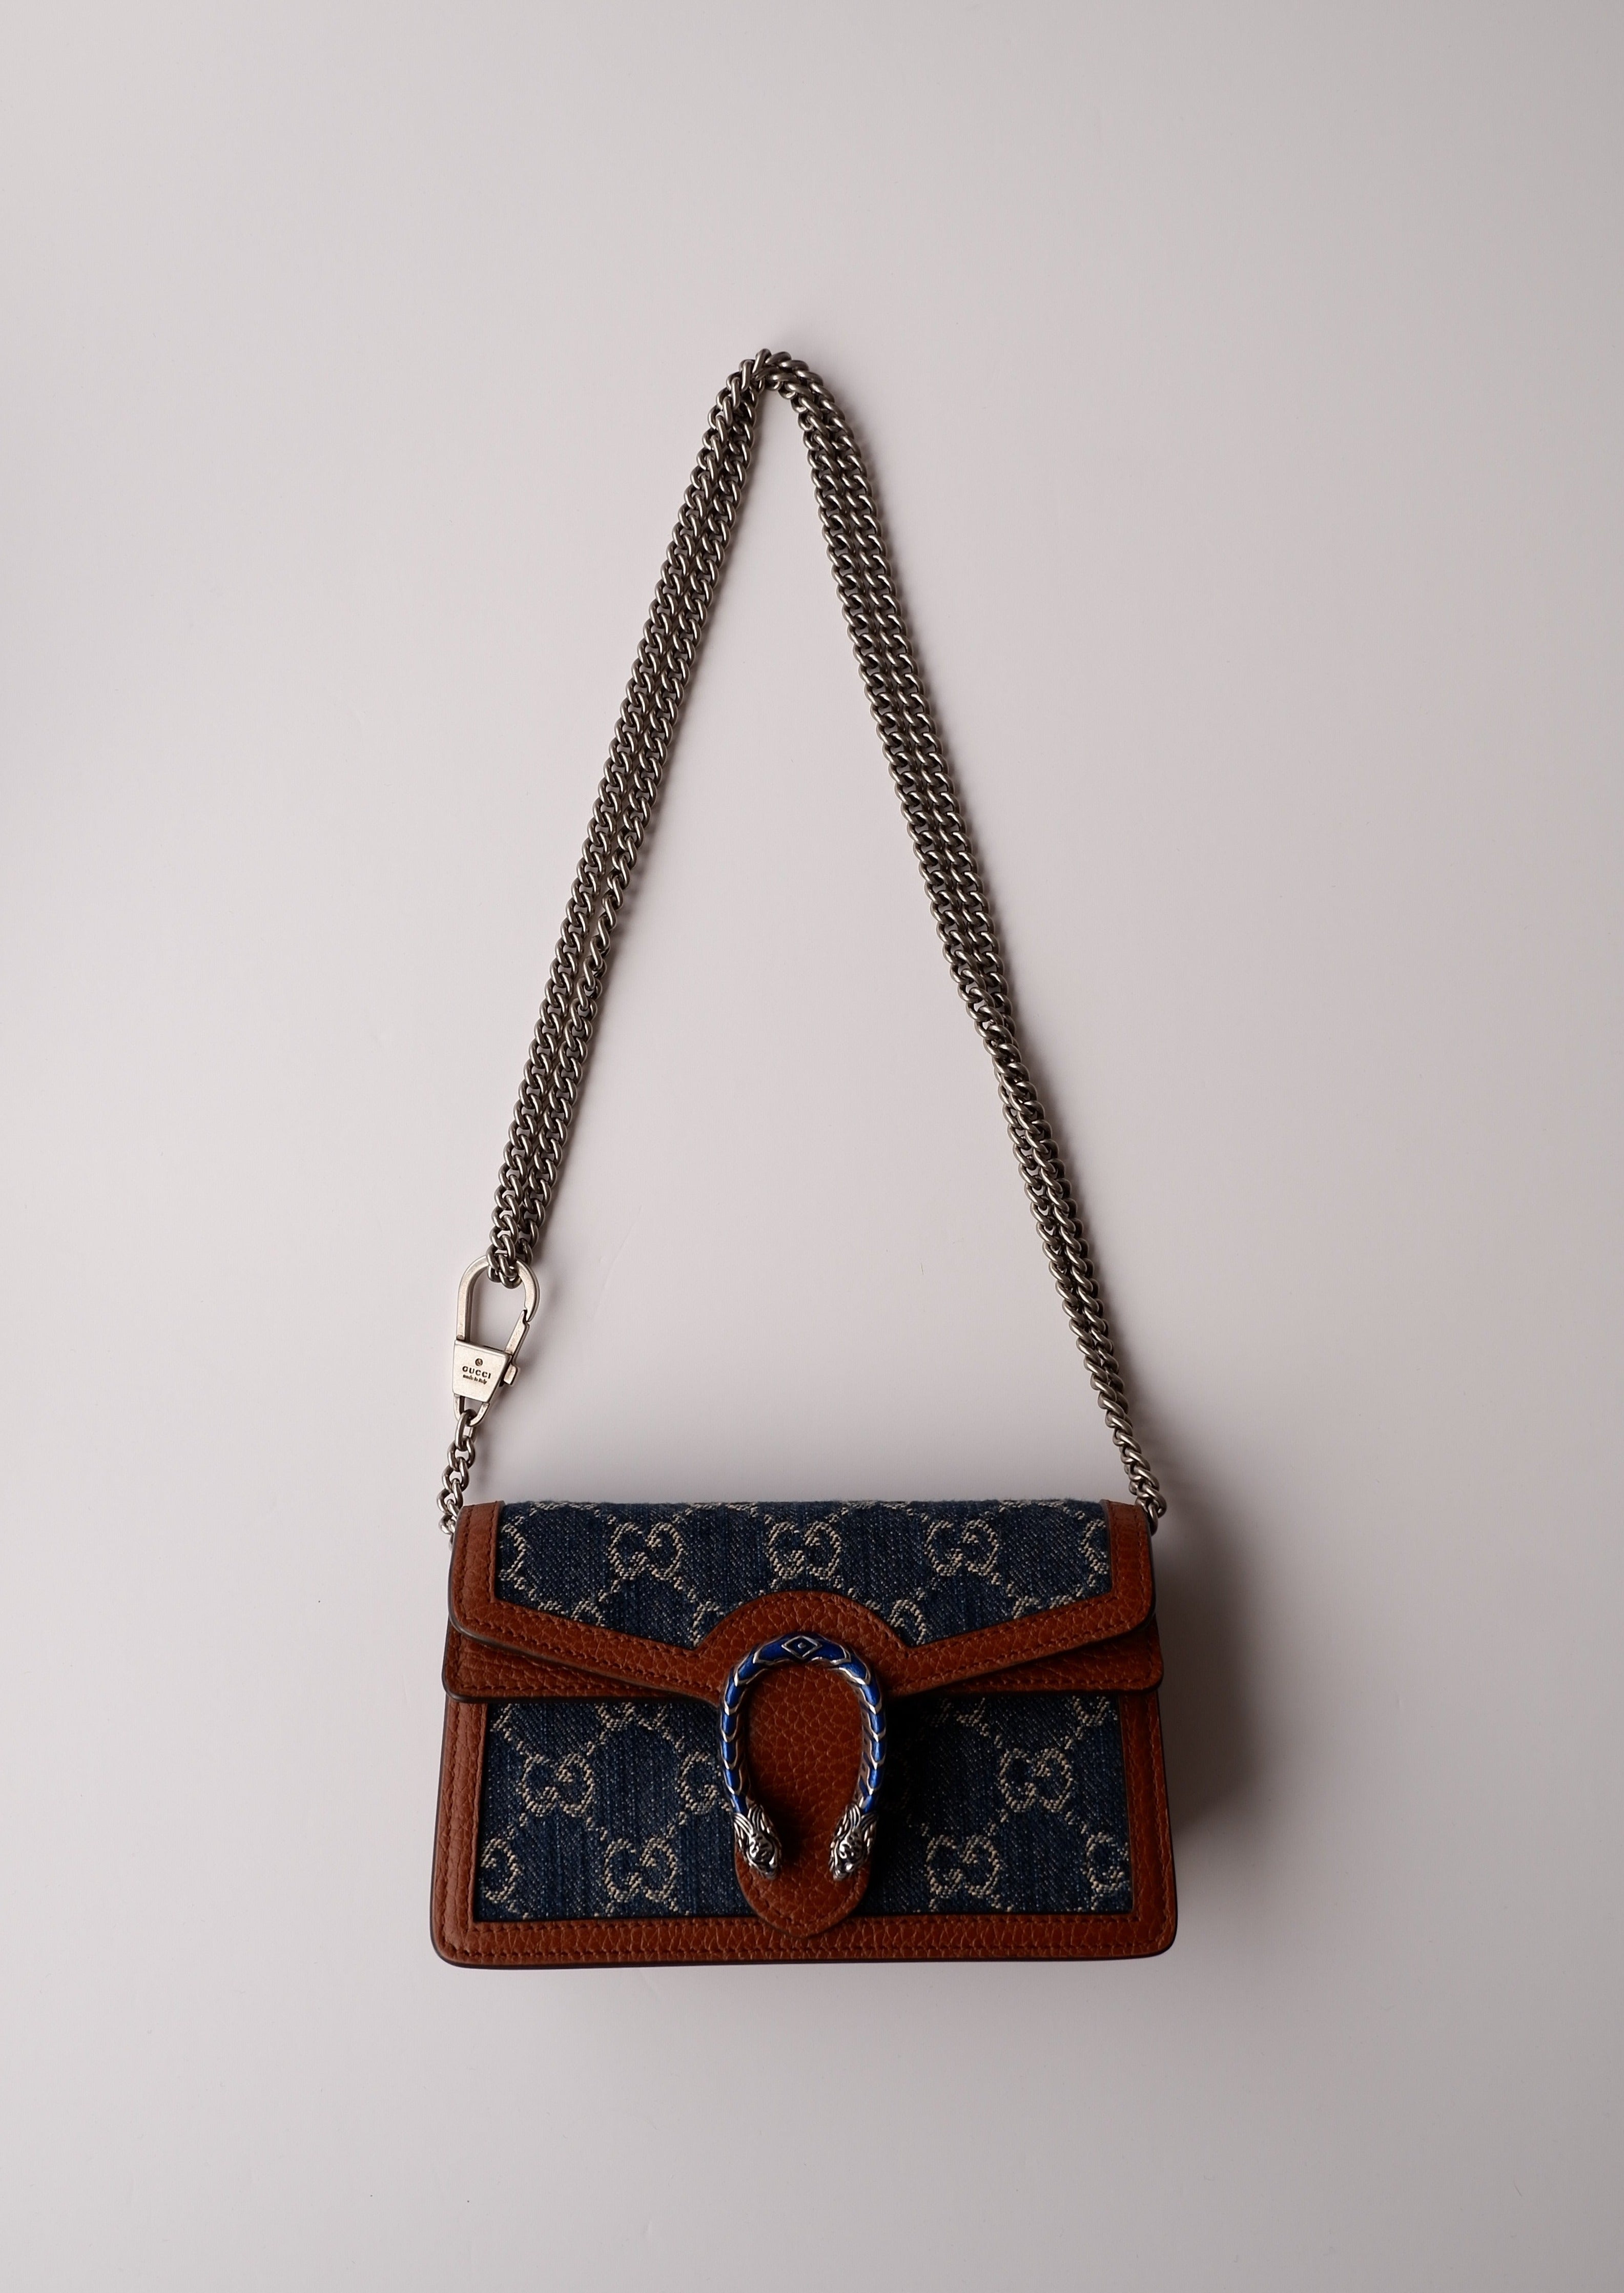 What do you think about denim on this Gucci super mini Dionysus ? : r/ handbags